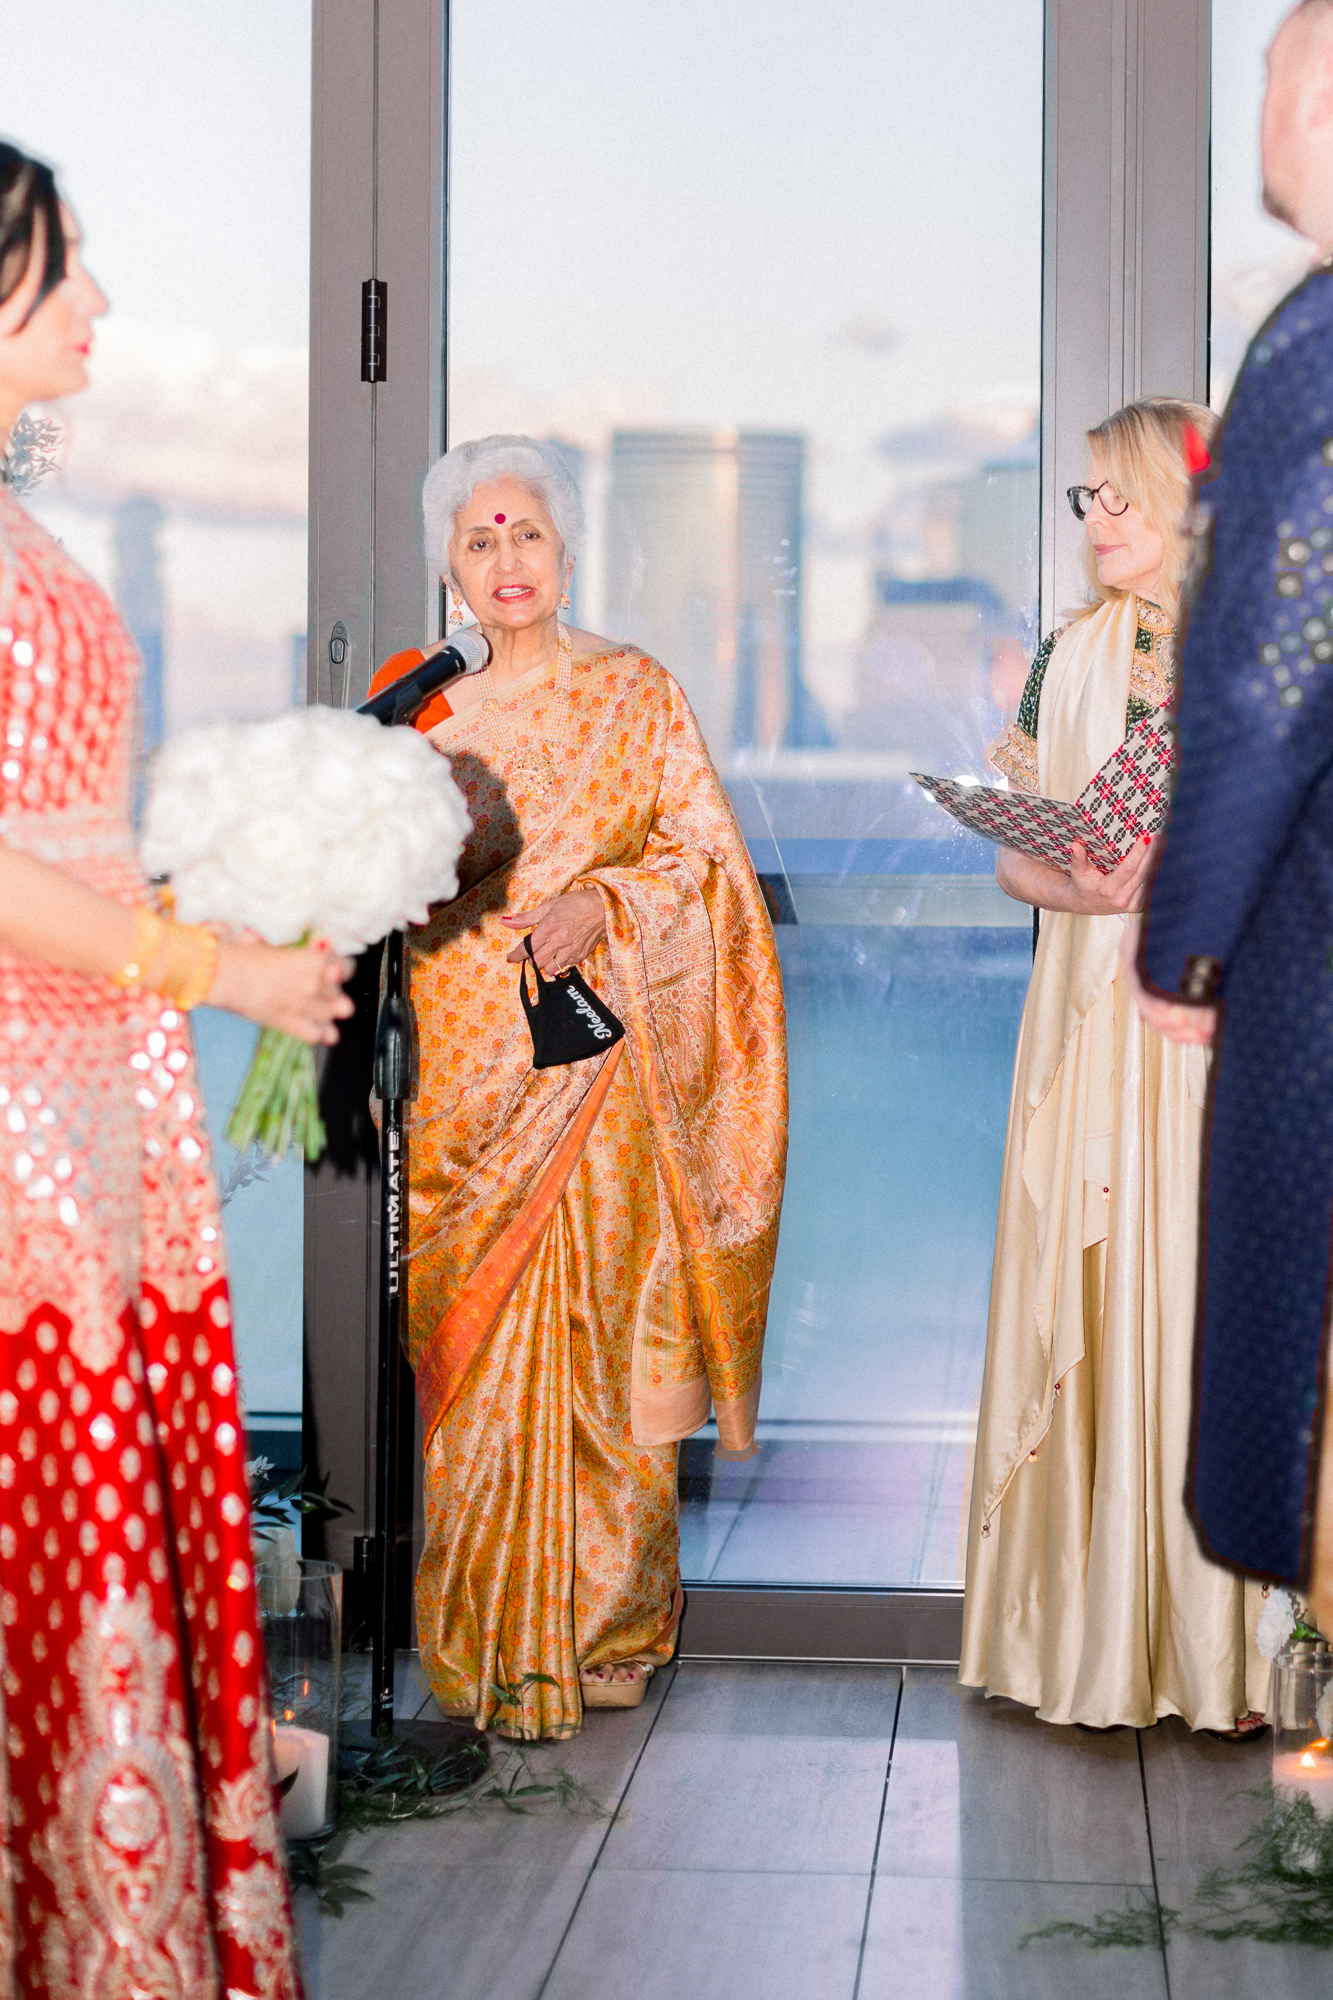 Stunning NJ winter wedding indoors at the Rooftop at Exchange Place